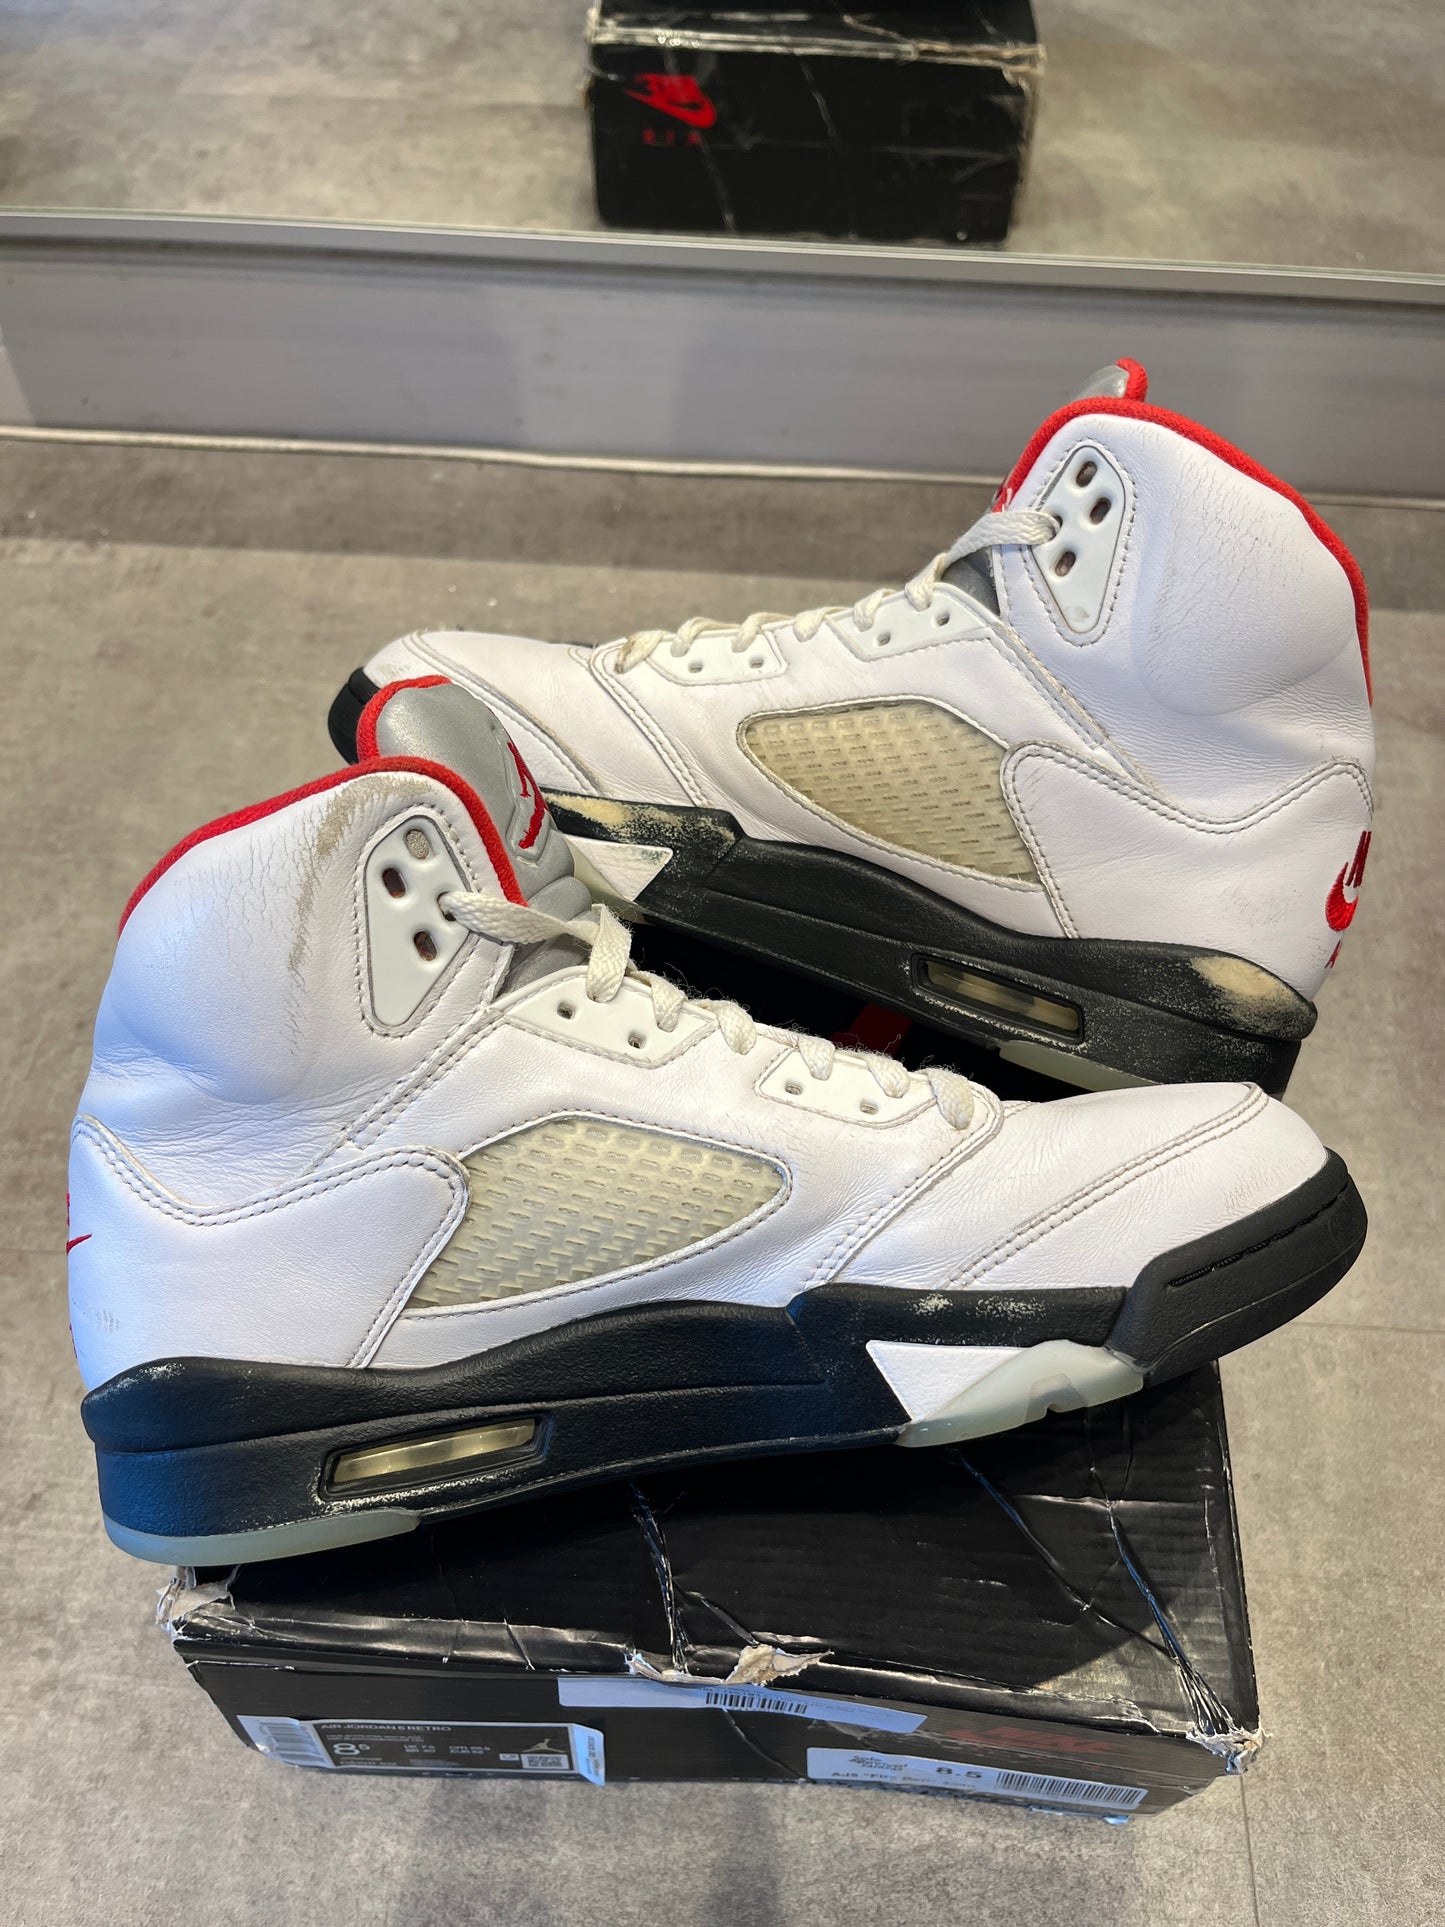 Jordan 5 Retro Fire Red (2020) (Preowned Size 8.5)